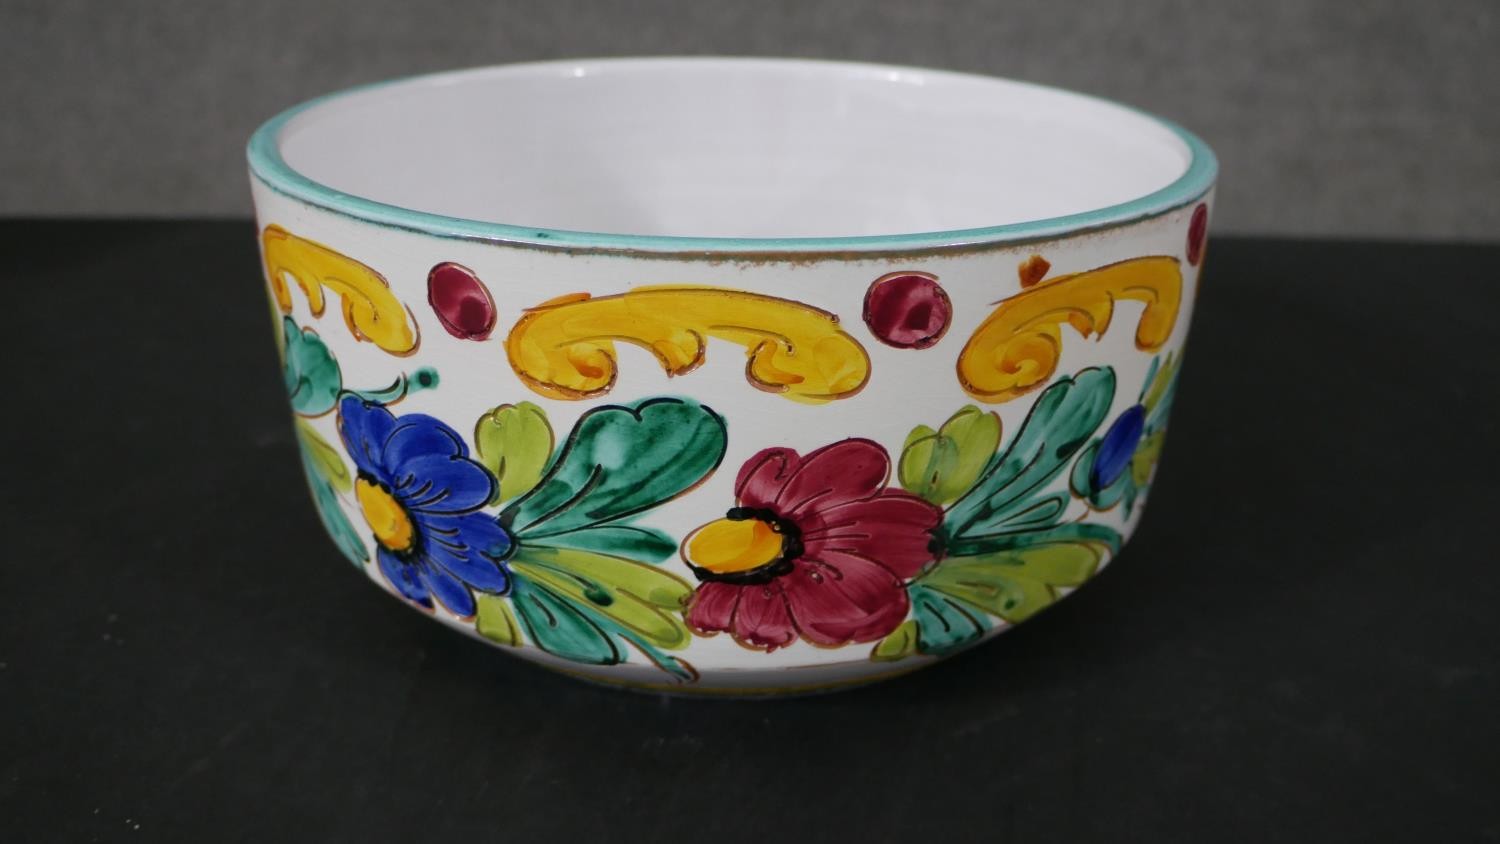 A large Portuguese hand painted ceramic rooster bowl along with a Majolica floral design bowl. D. - Image 5 of 6